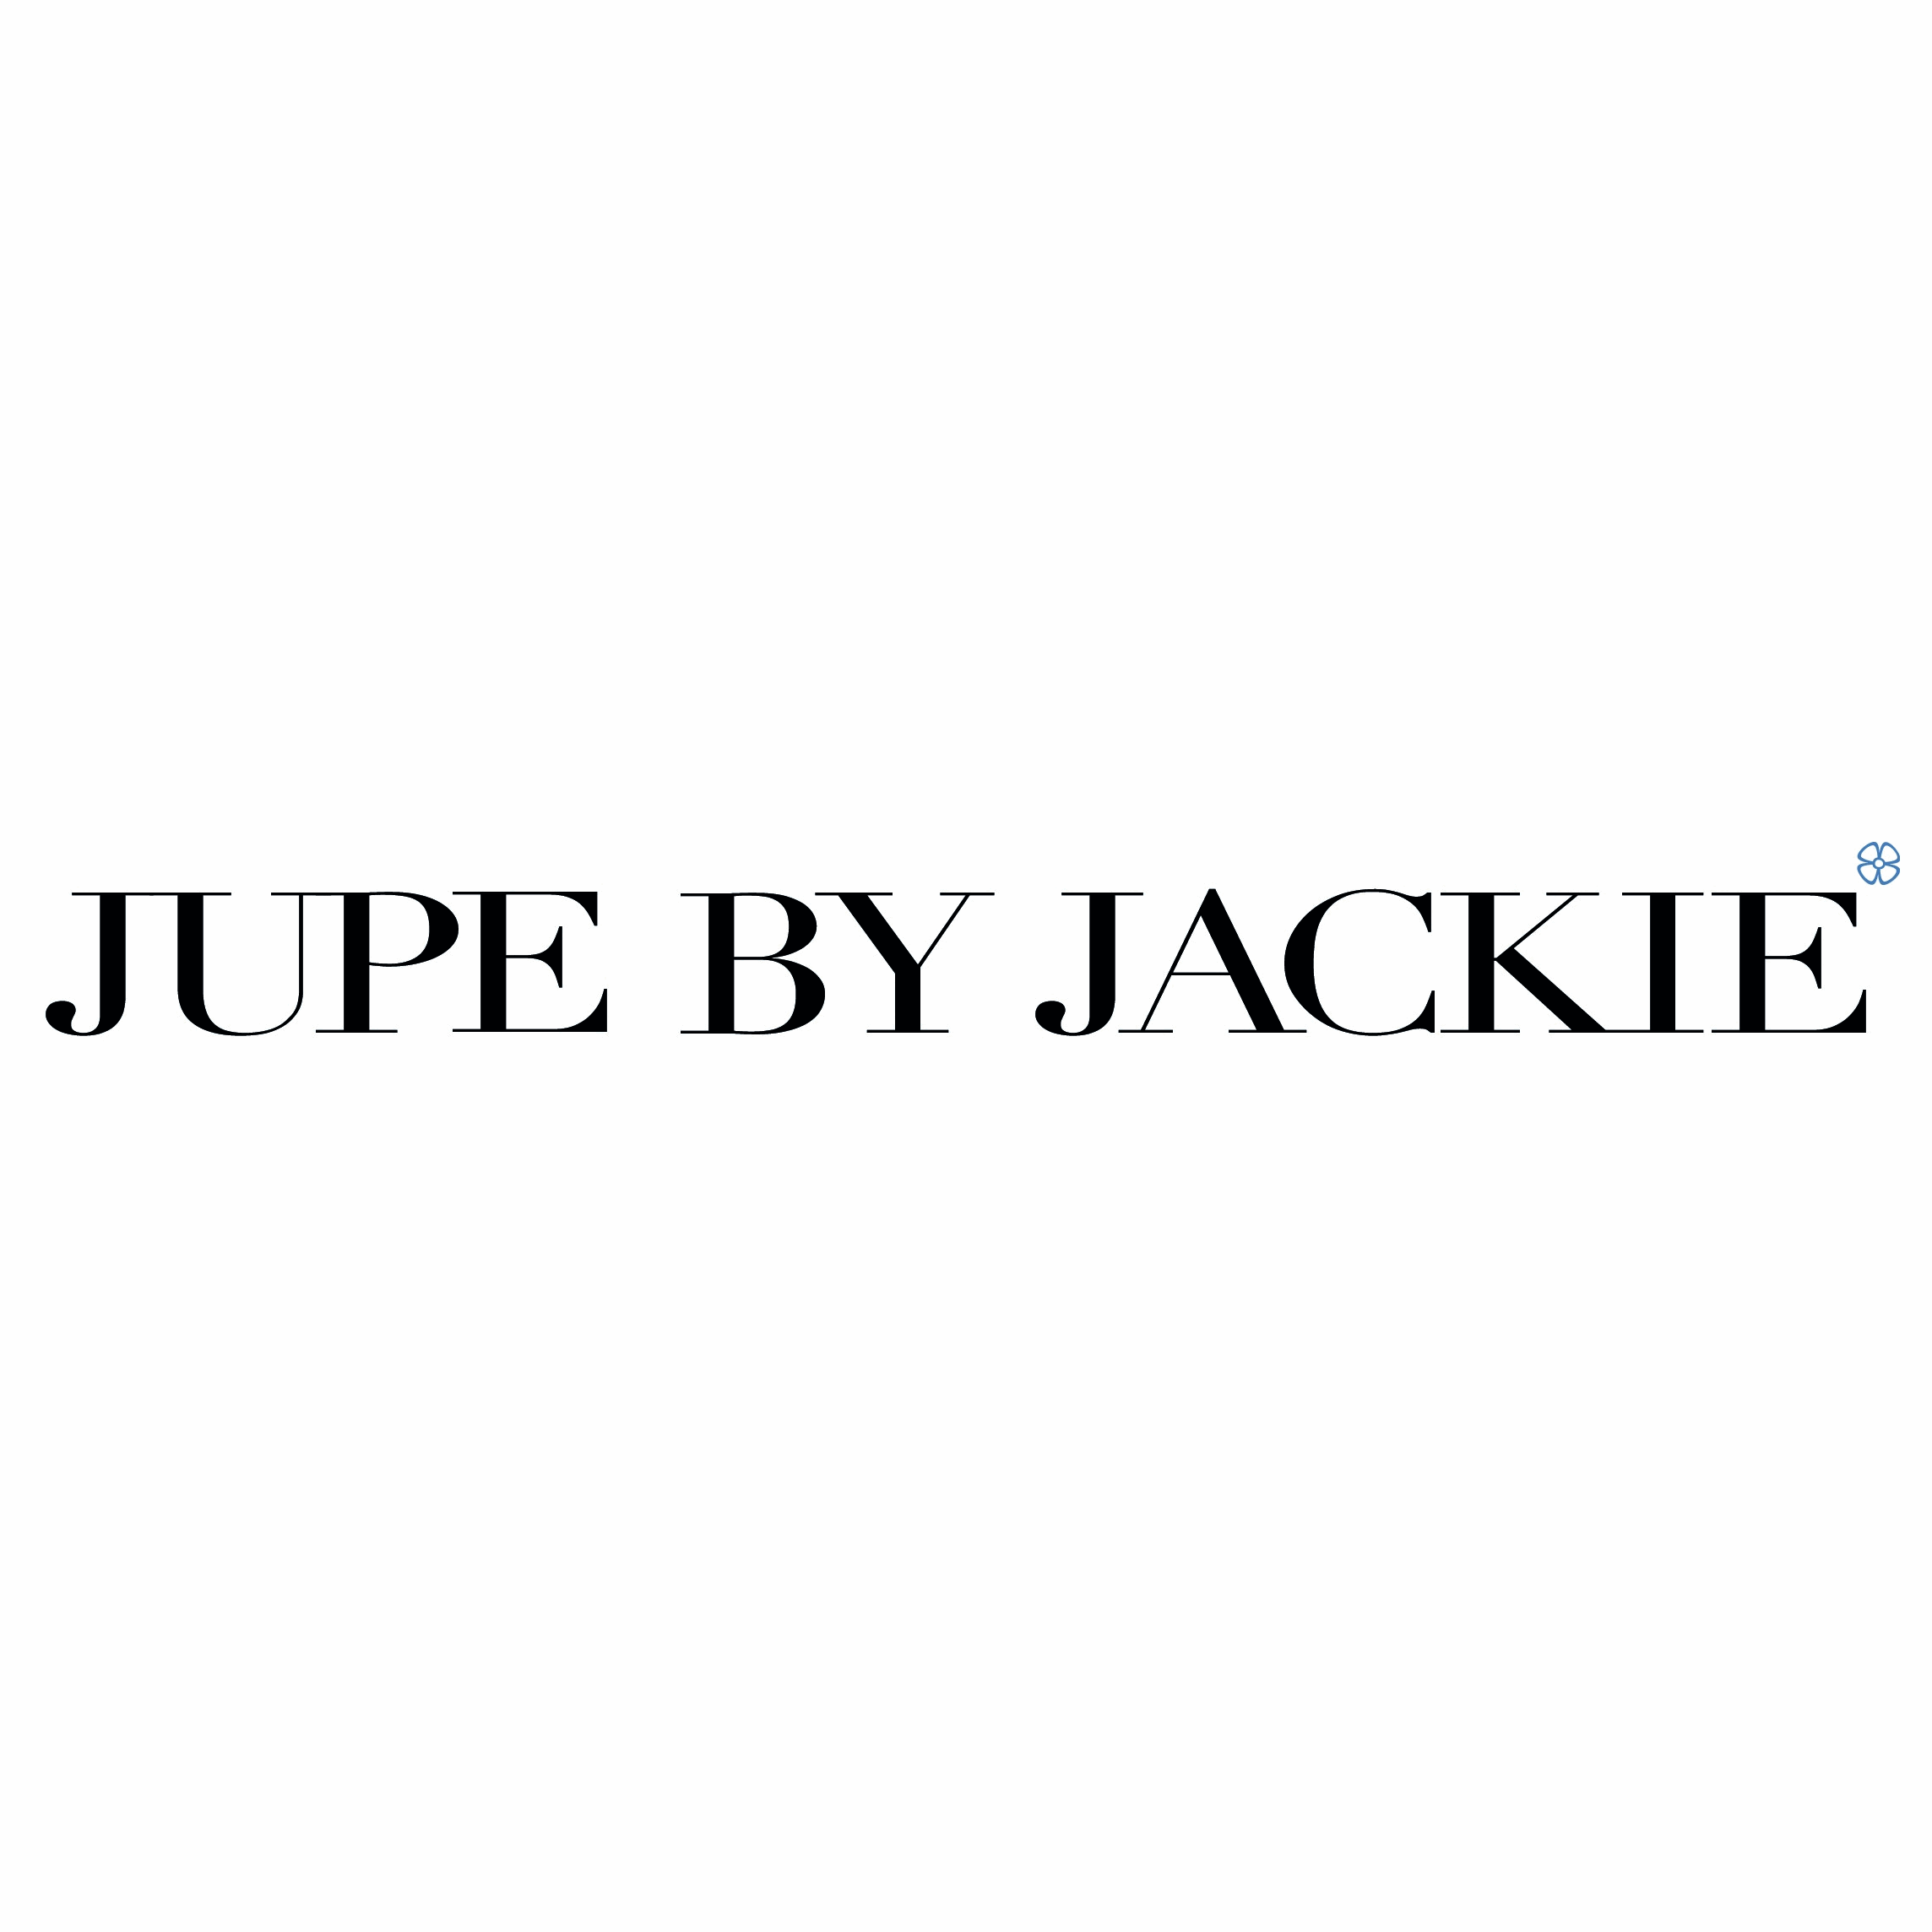 Jackie Logo - Jupe by Jackie | Solutions | Archiproducts